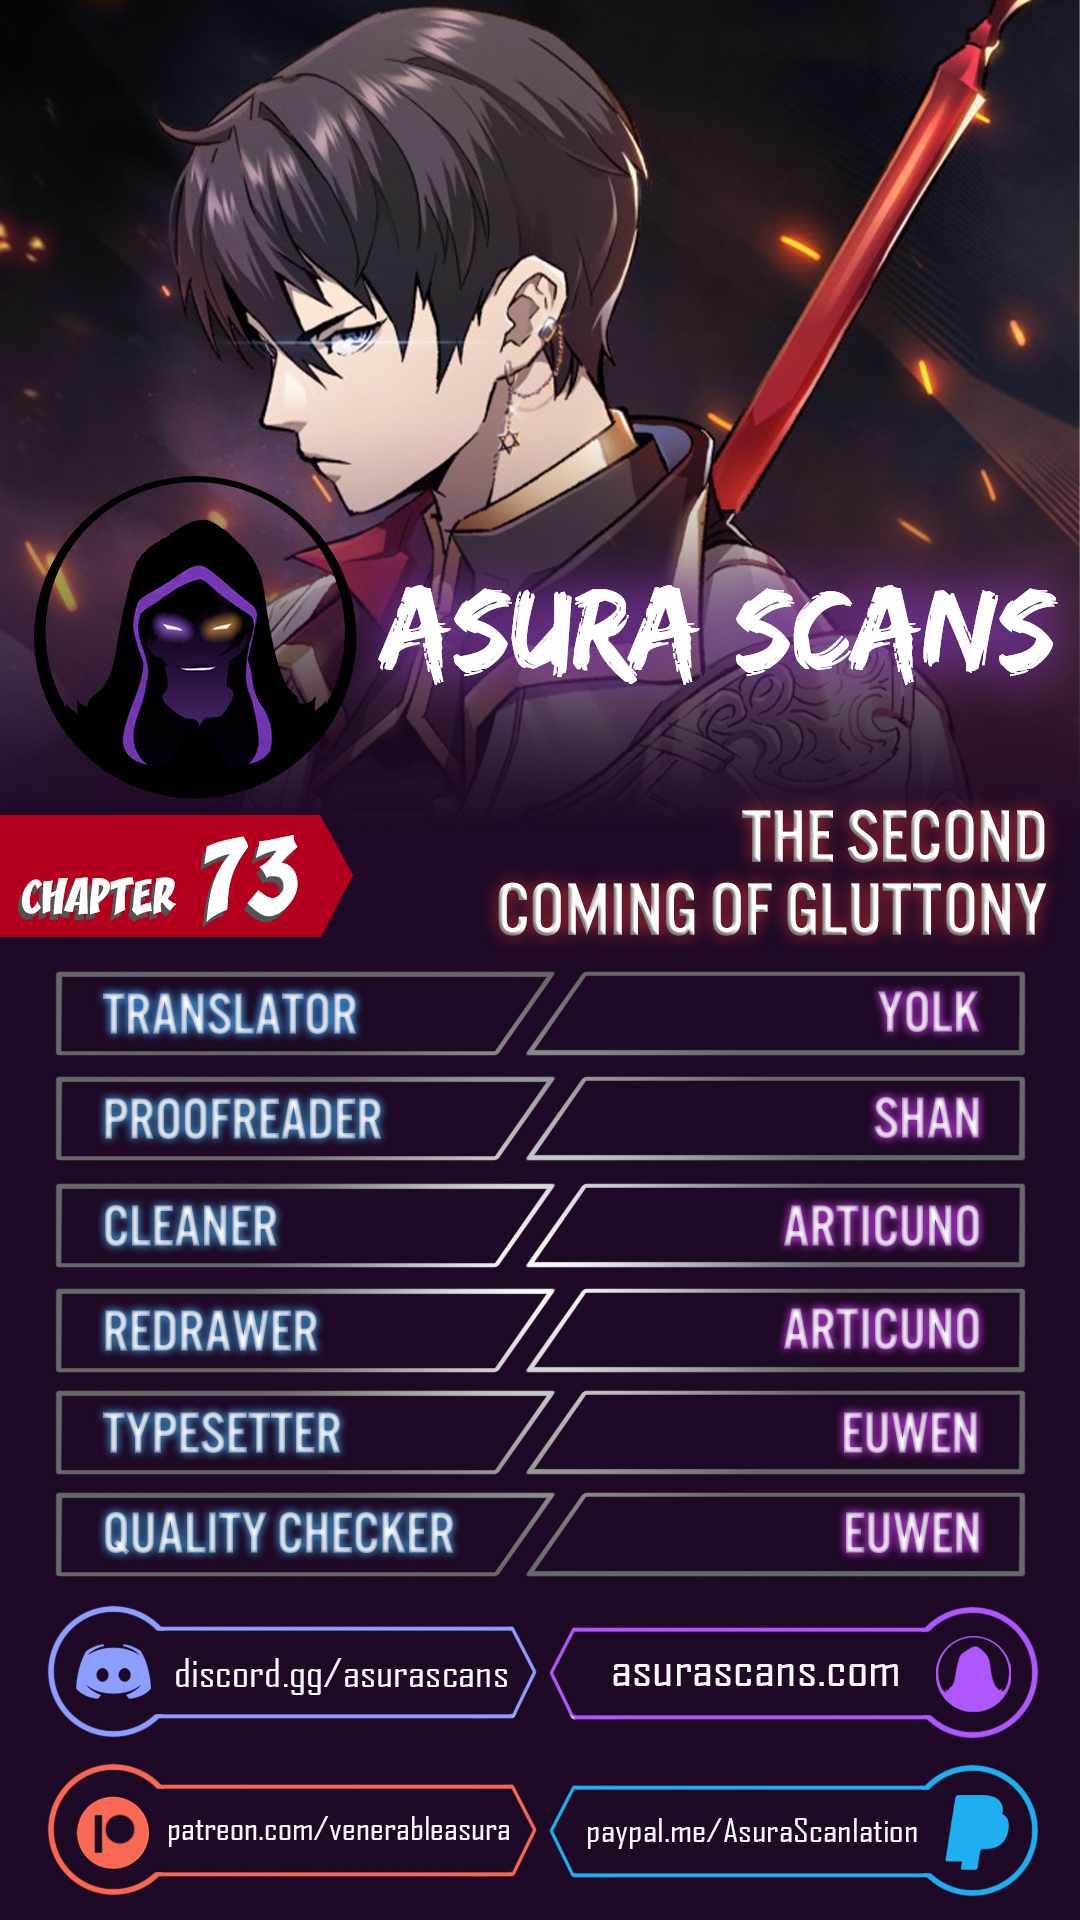 The Second Coming of Gluttony Chapter 73, The Second Coming of Gluttony 73, Read The Second Coming of Gluttony Chapter 73, The Second Coming of Gluttony Chapter 73 Manga, The Second Coming of Gluttony Chapter 73 english, The Second Coming of Gluttony Chapter 73 raw manga, The Second Coming of Gluttony Chapter 73 online, The Second Coming of Gluttony Chapter 73 high quality, The Second Coming of Gluttony 73 chapter, The Second Coming of Gluttony Chapter 73 manga scan